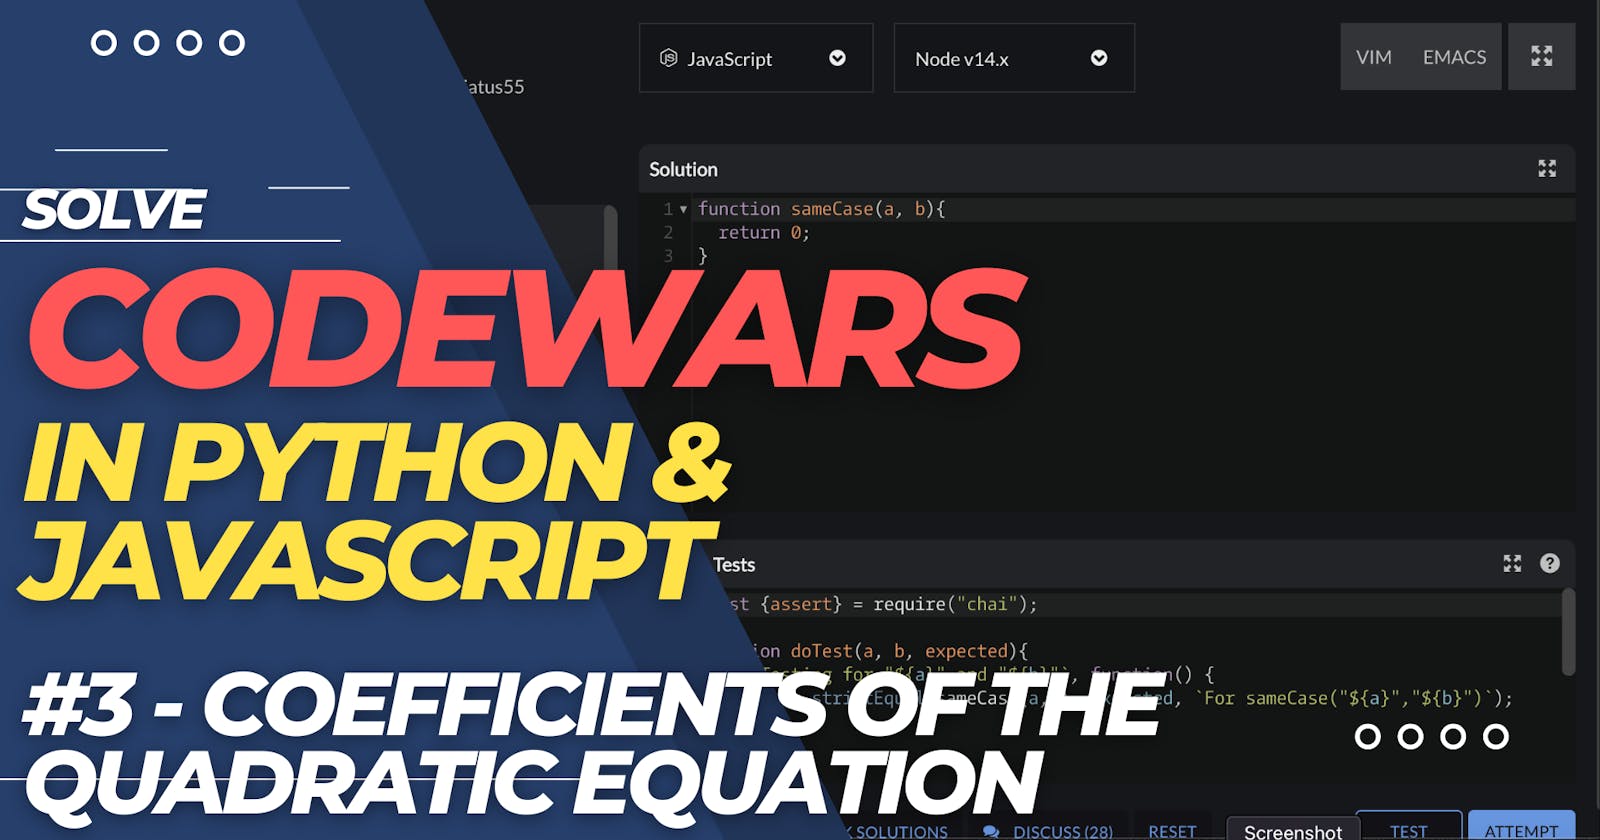 CODEWARS #3 - Coefficients of the Quadratic Equation (solved in Python & Javascript)